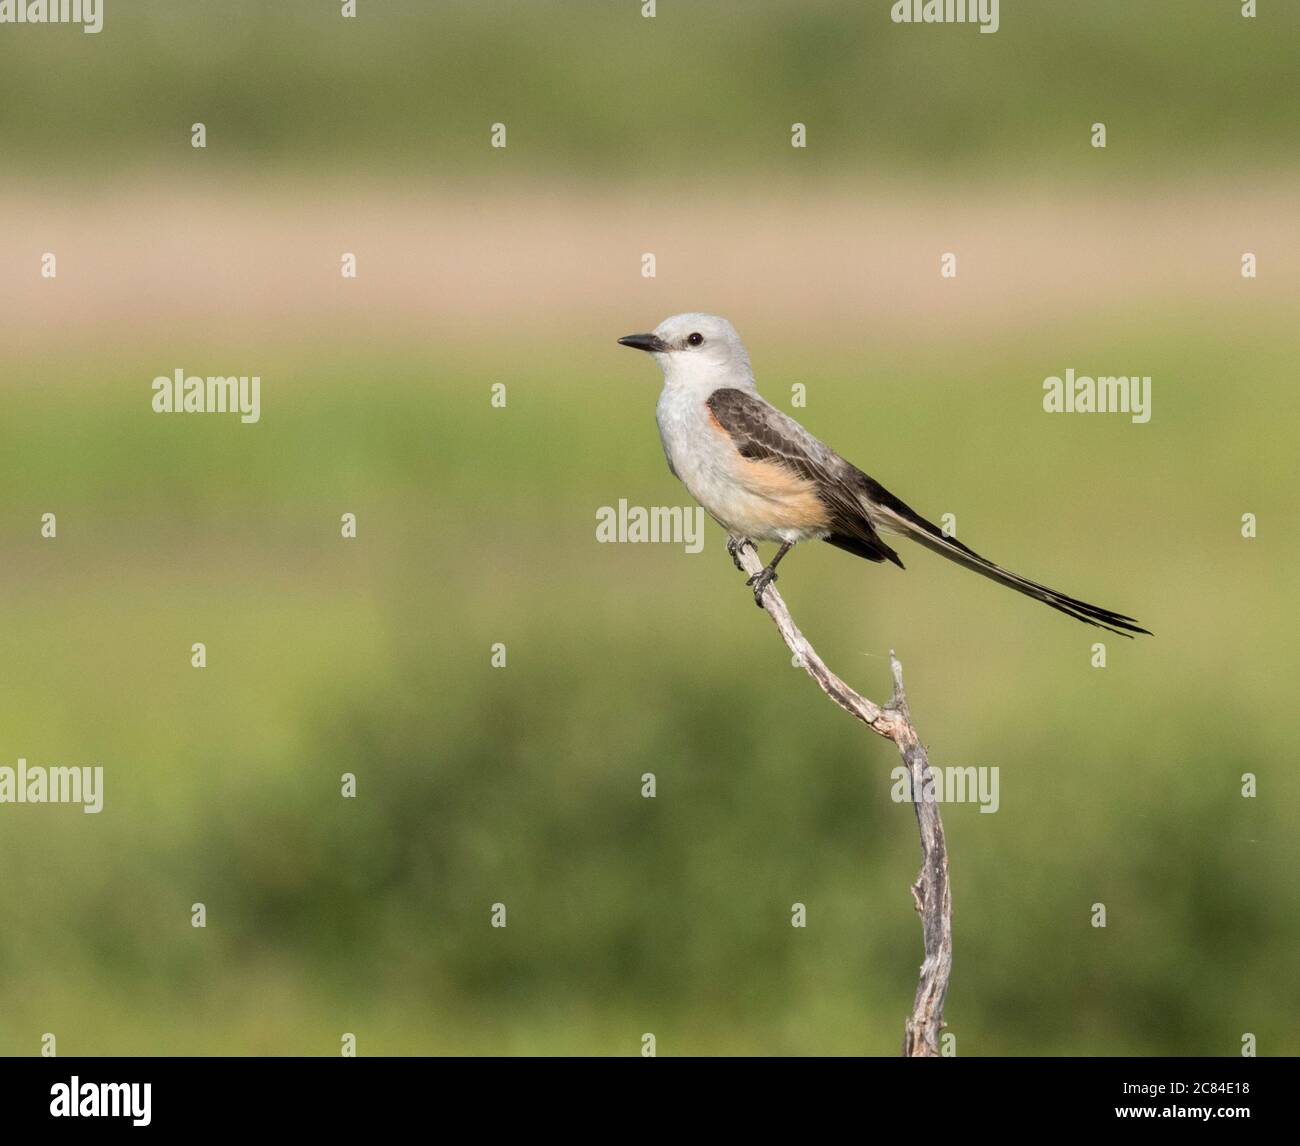 The scissor tailed flycatcher (Tyrannus forficatus) perched on the branch at wetland, Texas Stock Photo